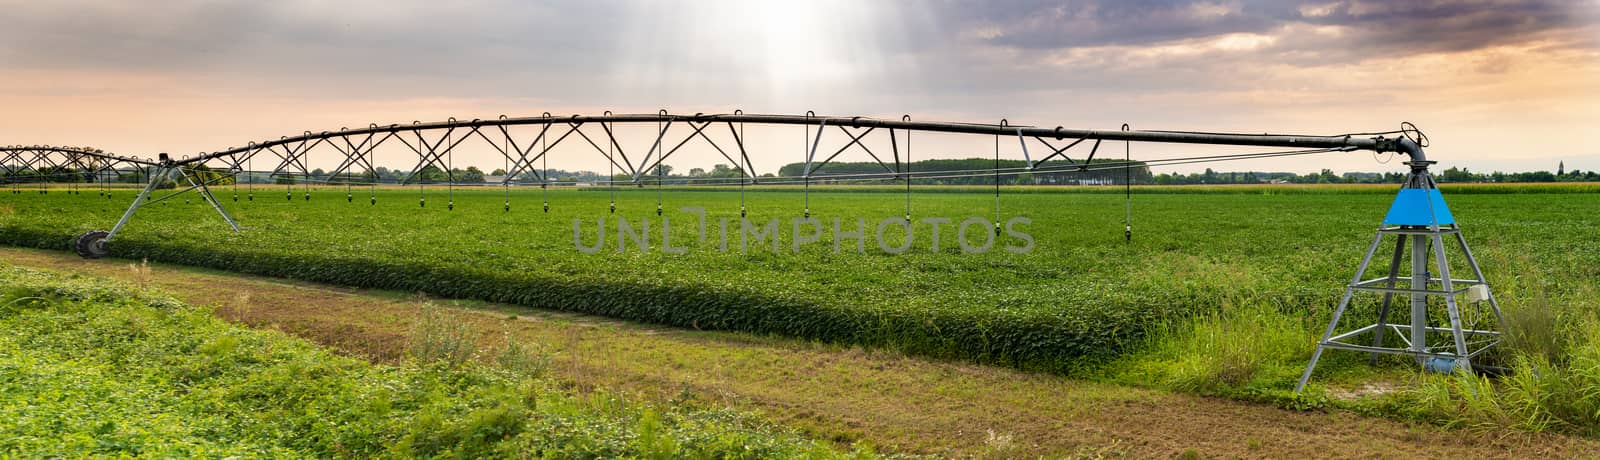 Irrigation sprinkler in agriculture land. Sunset panoramic image. Green plants in farm.